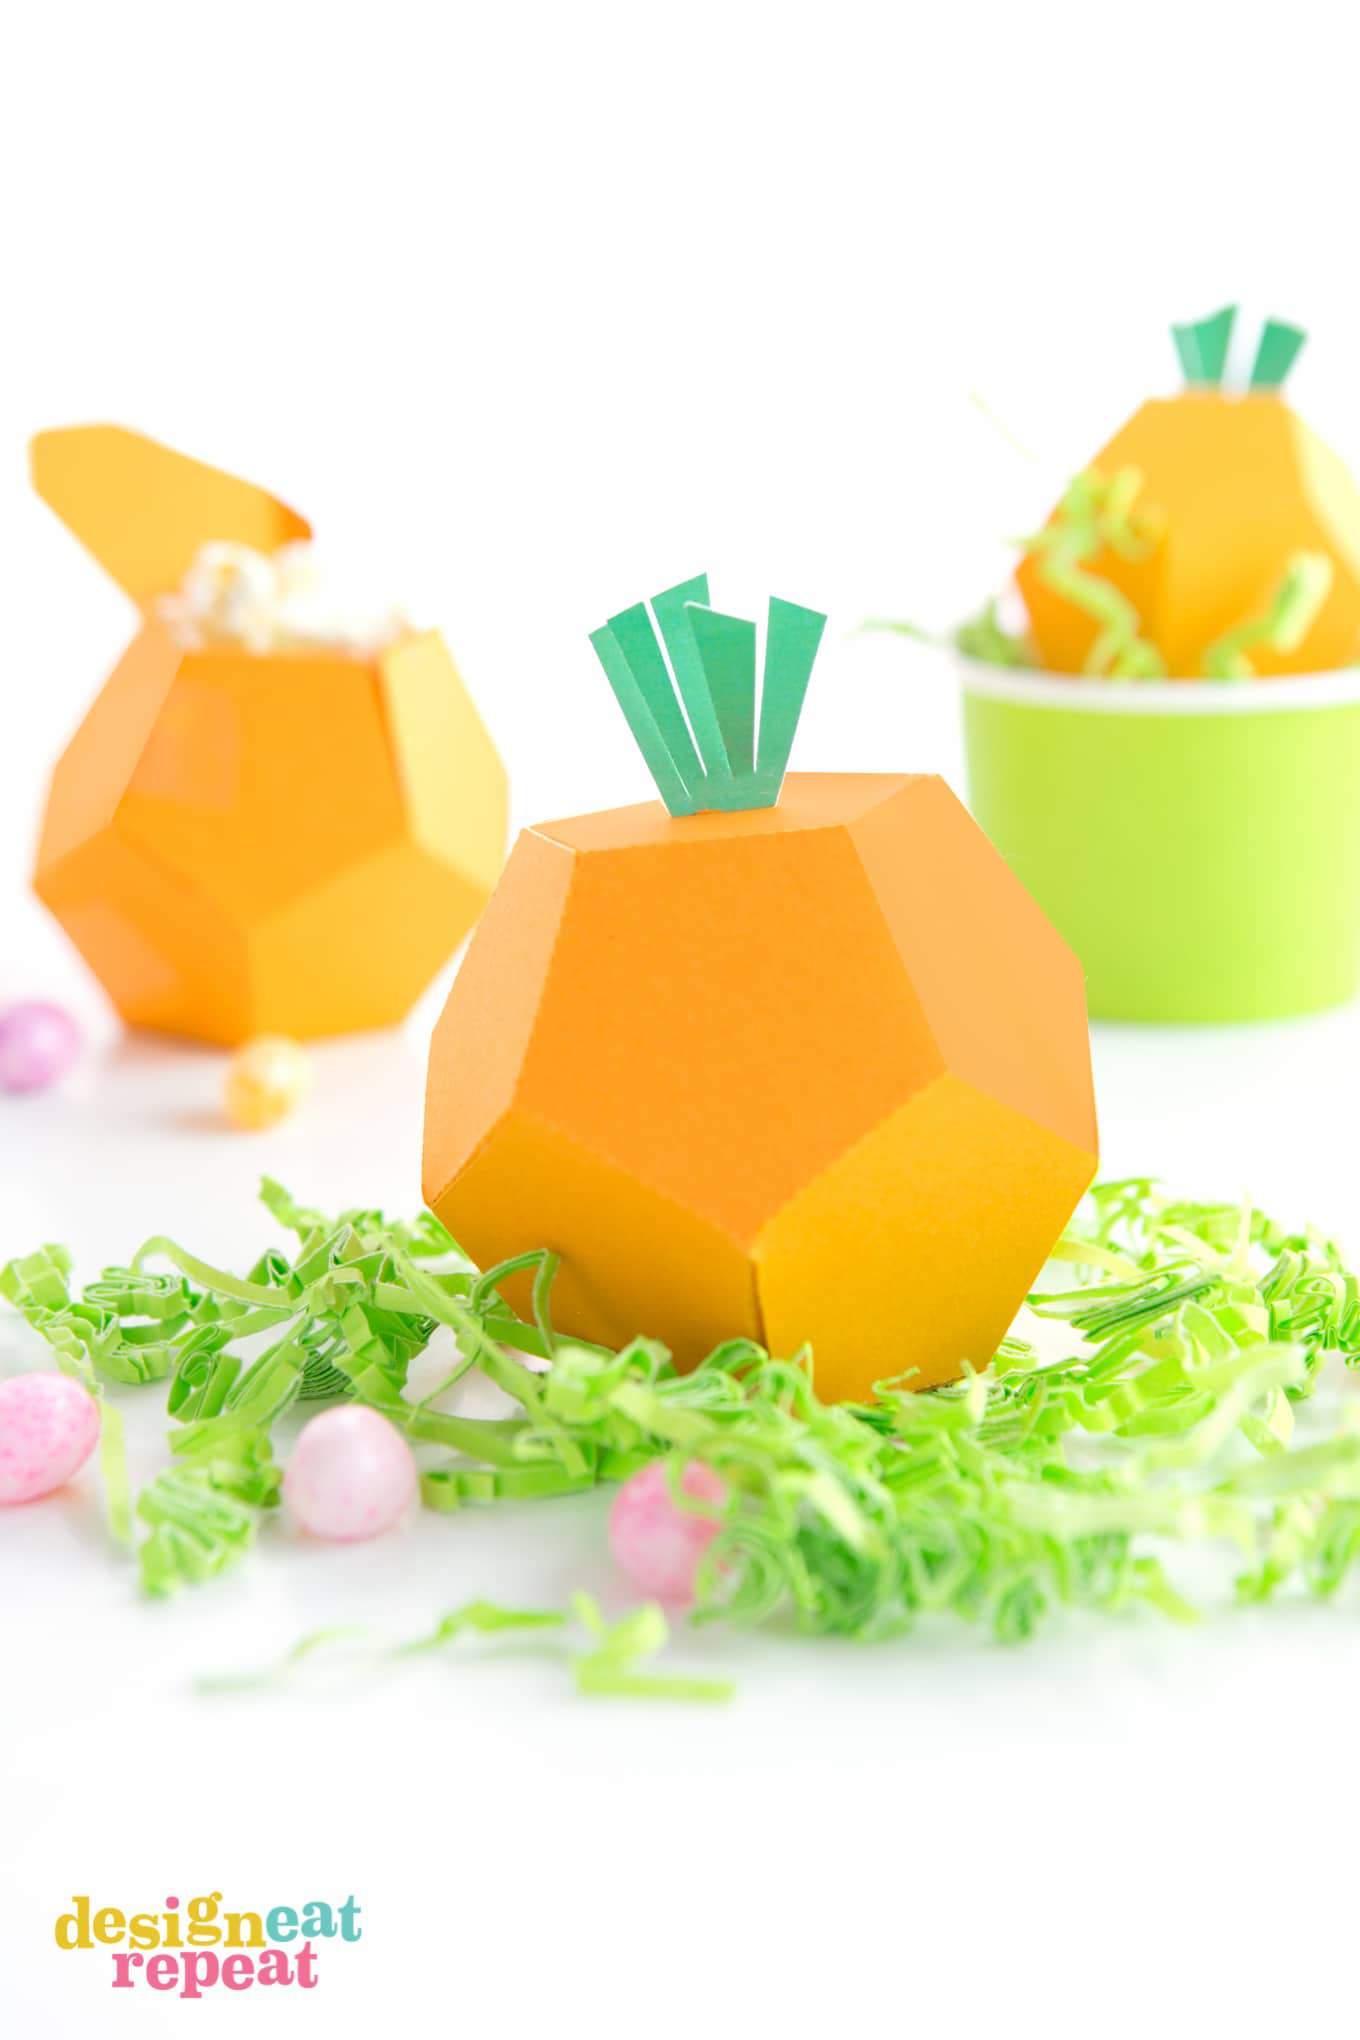 Download these printable carrot treat boxes, fill with candy, and have yourself an adorable little treat for Easter or Spring time goodies!